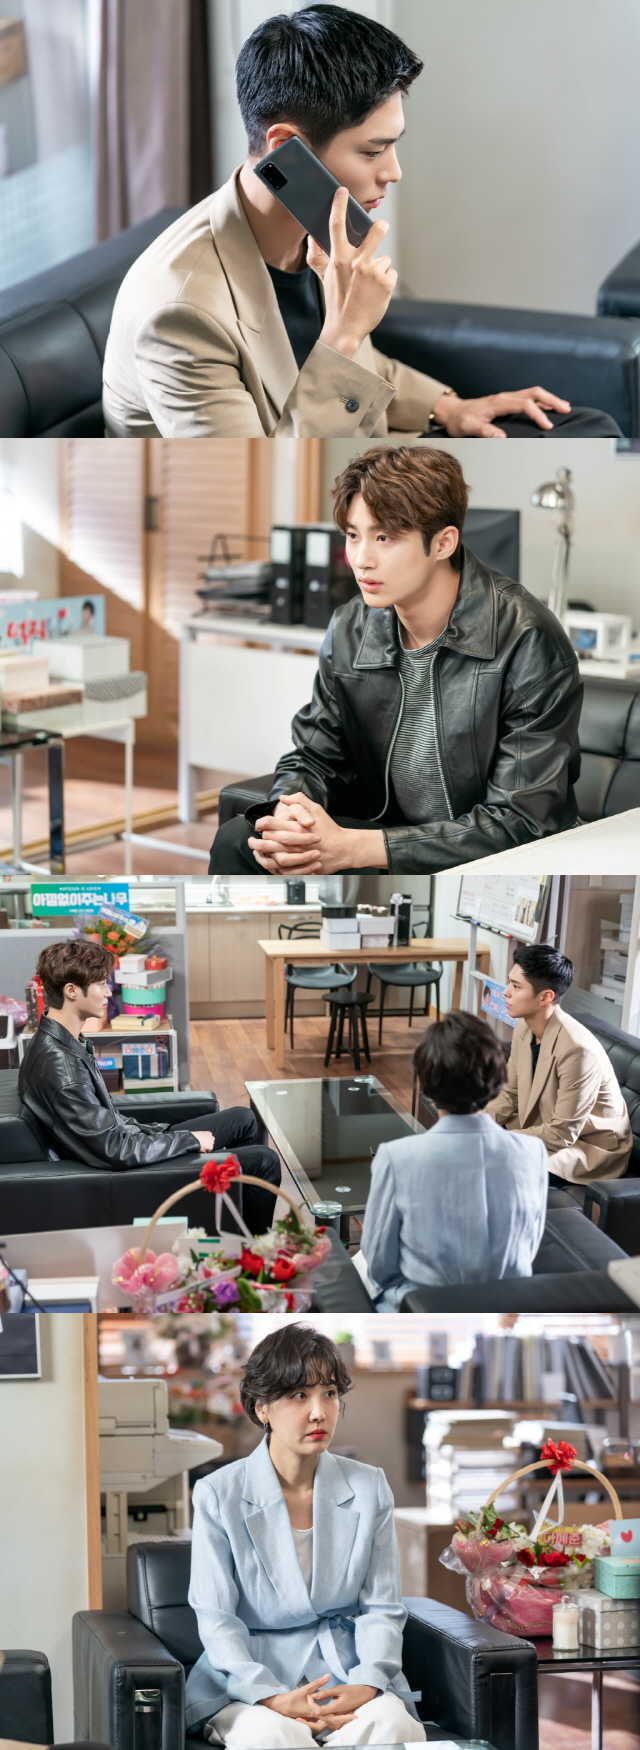 TVNs monthly drama Record of Youth (director Ahn Gil-ho, playwright Ha Myung-hee, production fan entertainment, studio dragon) released the images of Sangers Sa Hye-joon (Park Bo-gum) and Byeon Wooseok on the 12th.The day I have never seen before, I am curious about the nerves.In the last broadcast, Sa Hye-joon won the best performance award by succeeding in the drama The Return of the King.Sa Hye-joons unstoppable Shus move, which has achieved Actors dream over the cold reality, gave a thrilling Qatarsis. However, unexpected trials came.The news of Charlie Chung (Lee Seung-jun)s death, which was taken by Sa Hye-joon at the moment of enjoying happiness, amplified his curiosity about future development.In the meantime, the tension of Champon Entertainment is caught, further heightening the sense of Danger.The hard face of Sa Hye-joon, who is talking to someone, makes him guess the unusual incident that came to him.With the silence flowing, the eye-catching of Sa Hye-joon and Won Hae-hyo Day pulls the tension tight. Manager Lee Min-jae (Shin Dong-mi) is also confused.Sa Hye-joon and Won Hae-hyo, who supported each other more than anyone else while growing the same dream, are drawing attention to what changes will come to the two youths who face the crossroads of different Choices.In the 11th broadcast on the 12th, the overcoming period of Sa Hye-joon, who faced an unexpected trials, is drawn.Charlie Justice A helper who is not welcomed by Sa Hye-joon, who is suffering from rumors that can not be controlled by death, will appear.Please pay attention to whether you can protect your dreams, love, and friendship in your own waving Danger, said the production team of the Record of Youth.Choices of Sa Hye-joon, who does not lose his conviction, will be impressed and Qatarsis. The 11th episode of Record of Youth will be broadcast at 9 pm on the 12th.